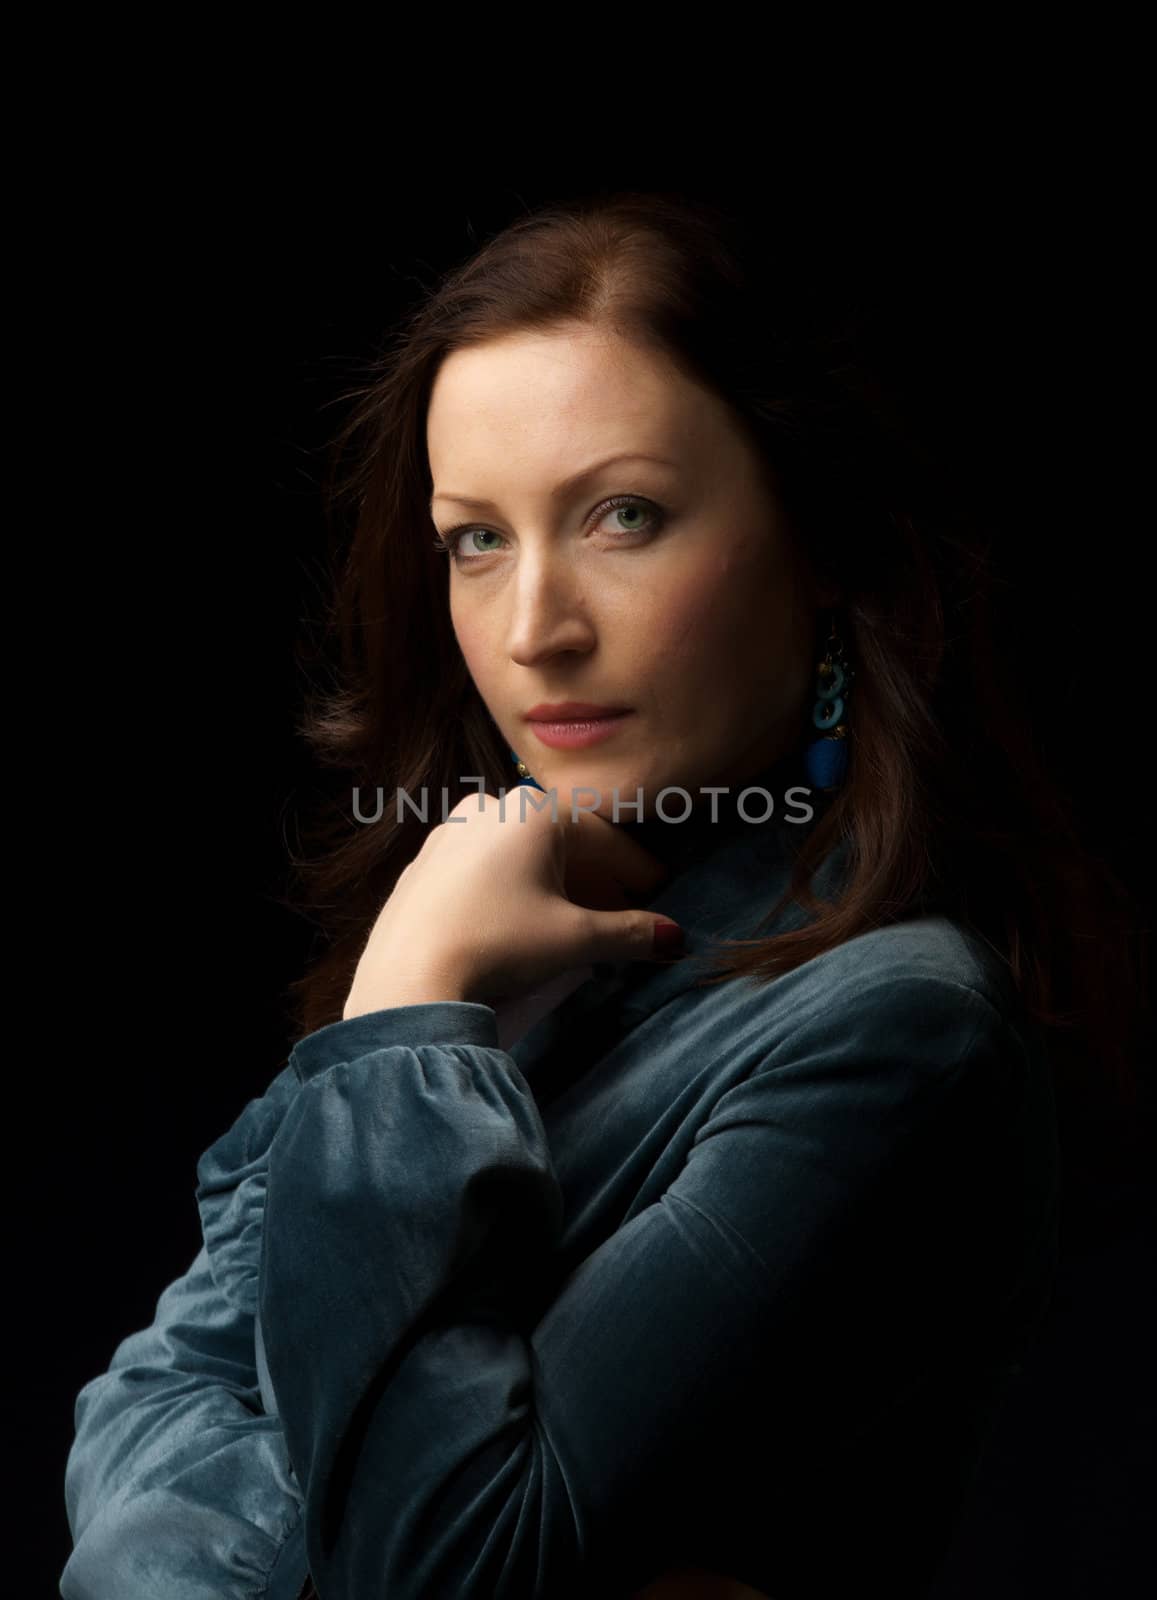 Lady looking to you - stodio portrait over dark background